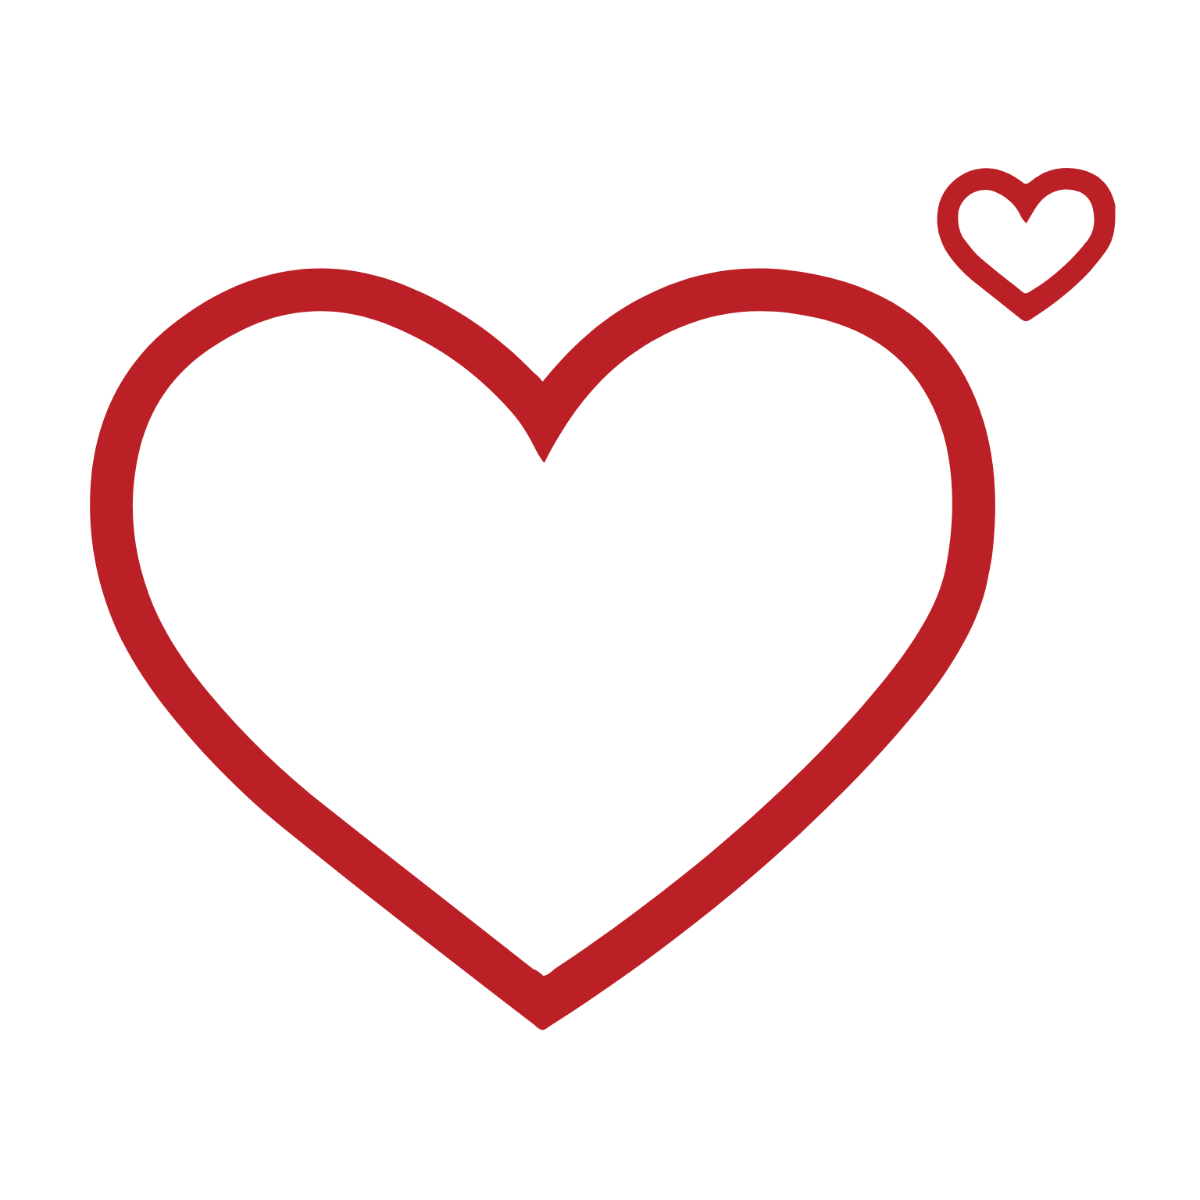 Small Heart Outline Clipart